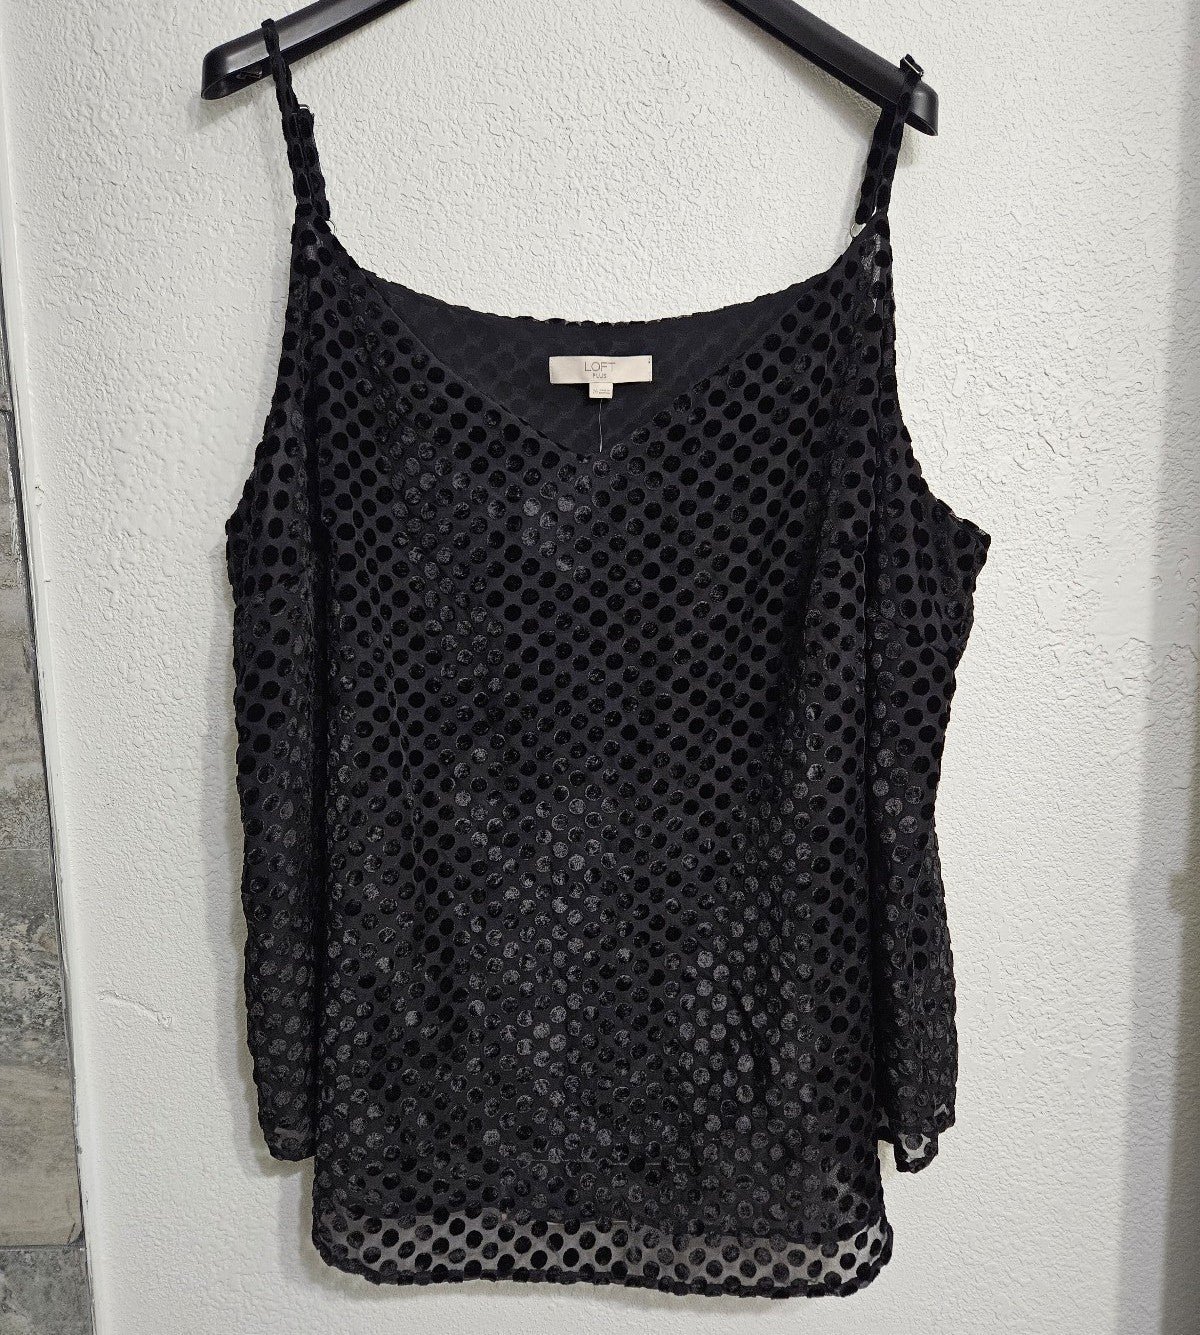 the Lowest price Stylish LOFT Cami Black Top New with tags mfvCiUOaw Hot Sale